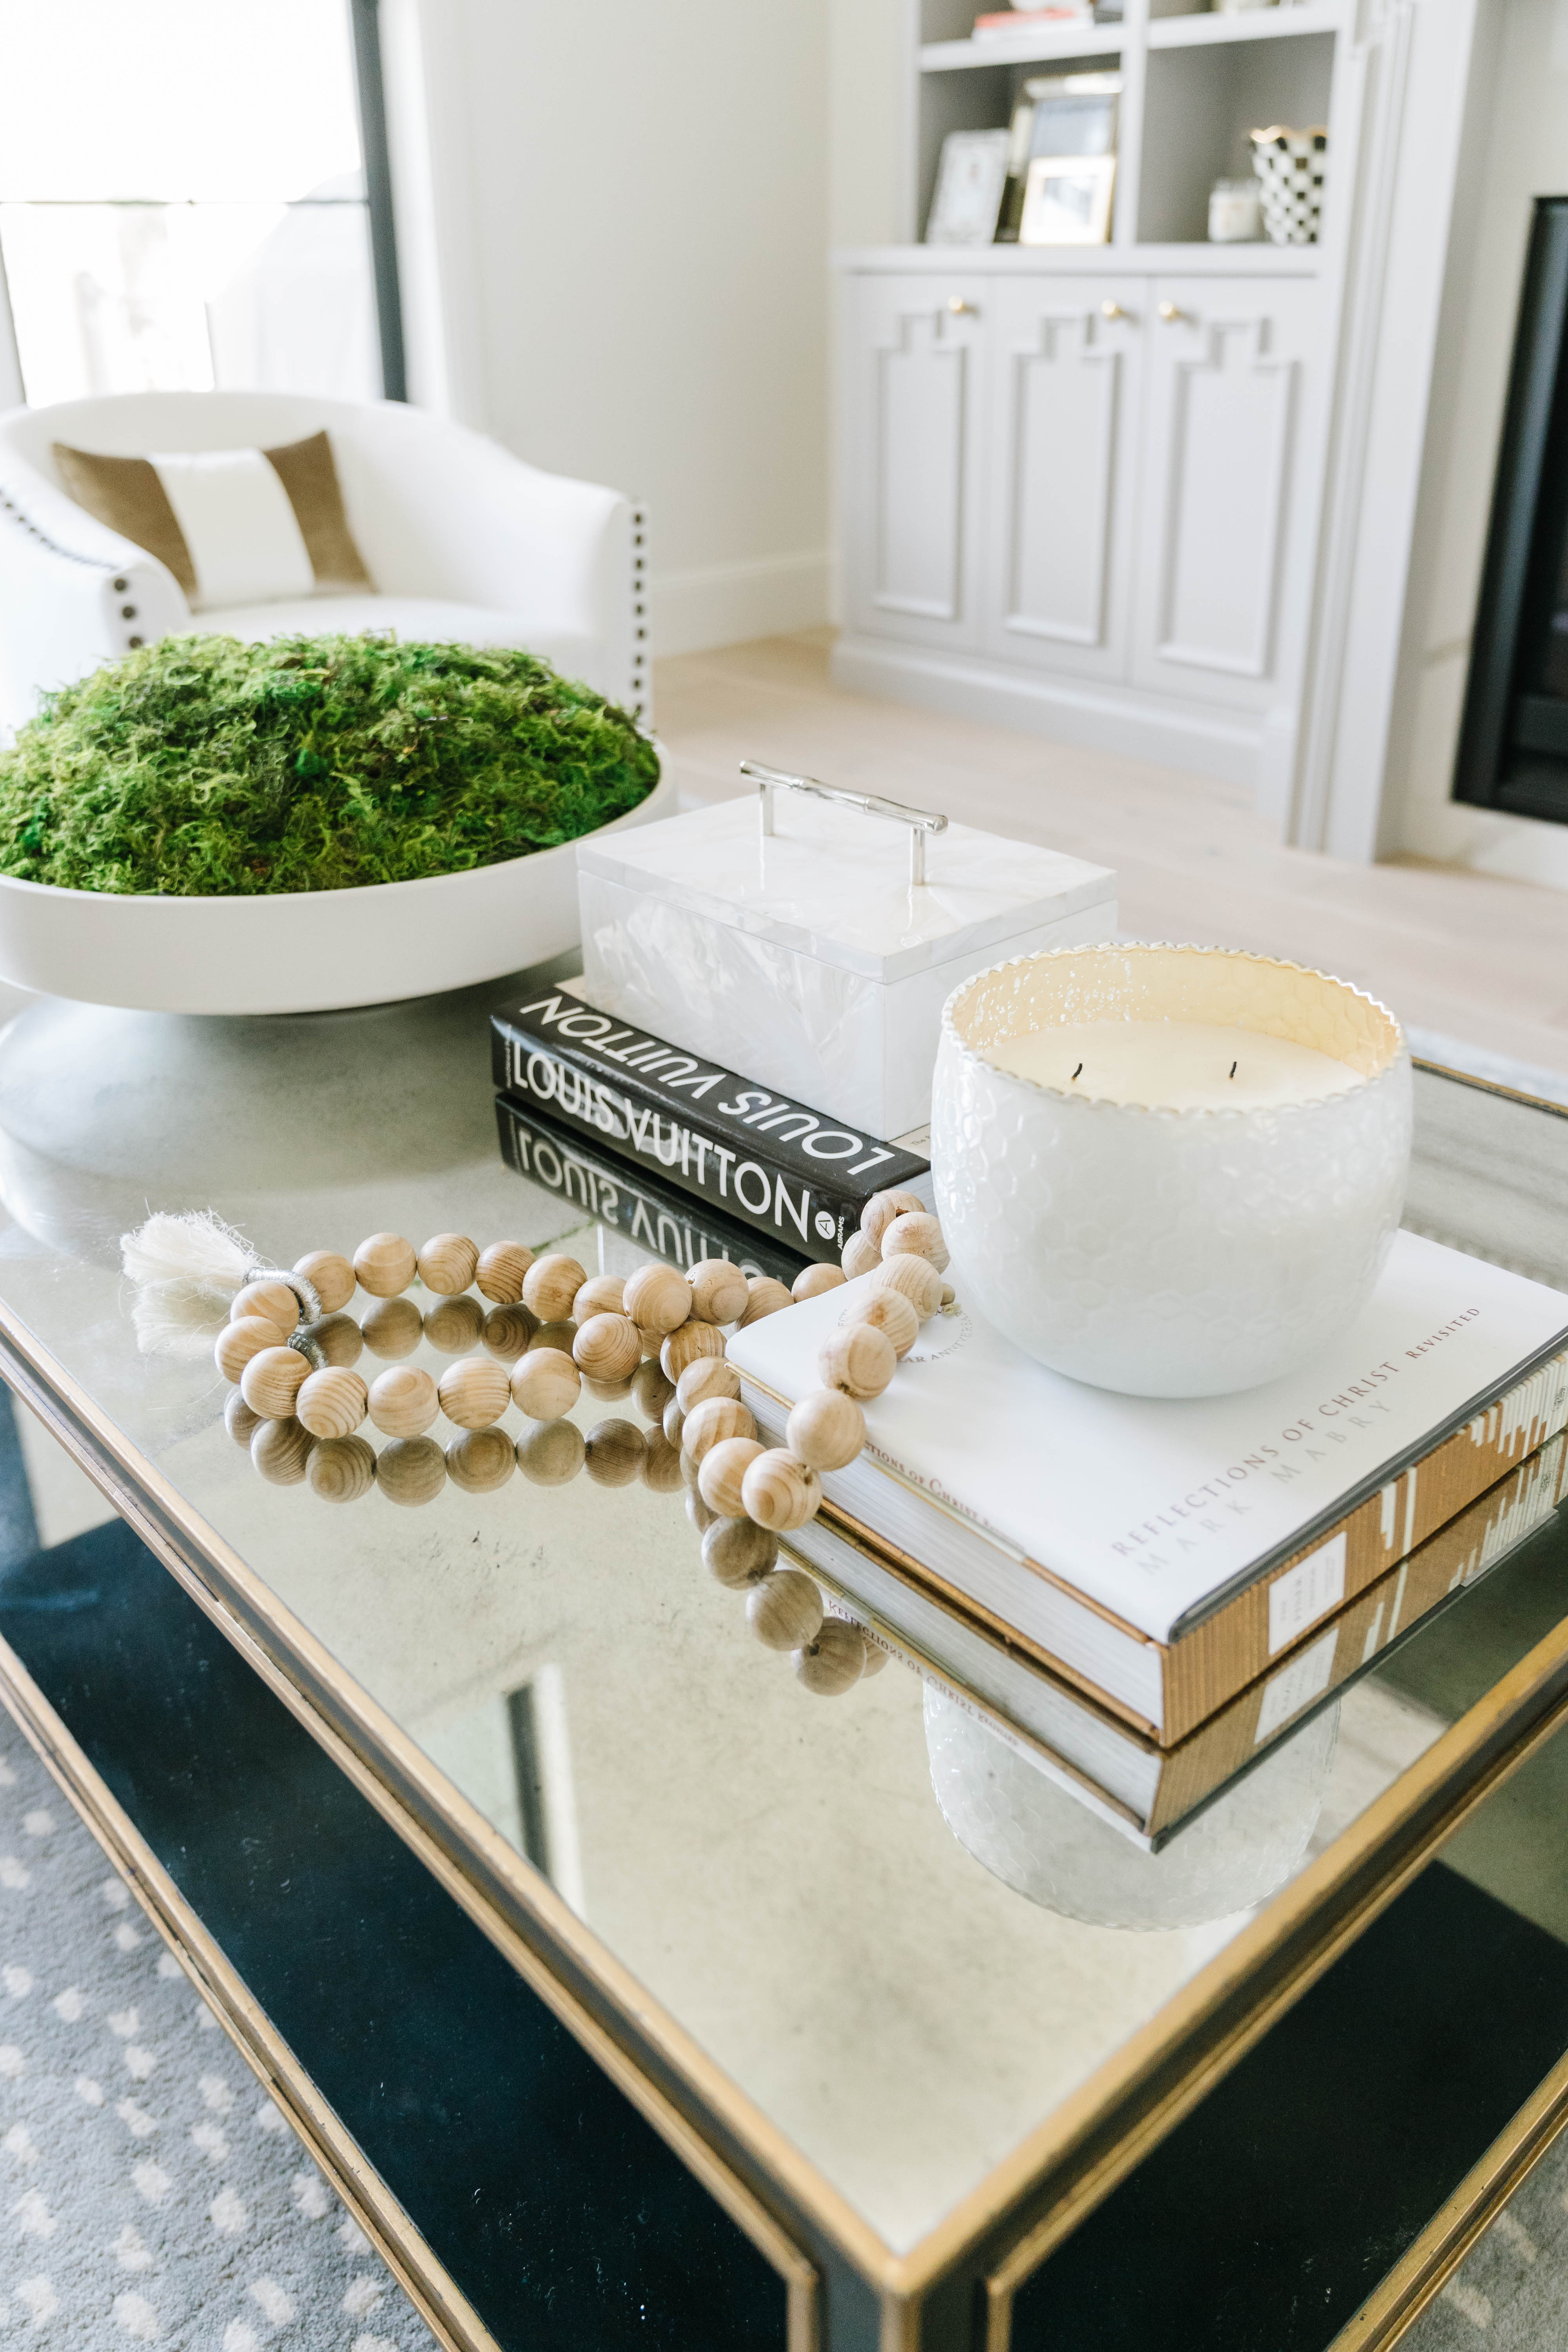 Favorite Coffee Table Books - Truly Destiny | Lifestyle Blog